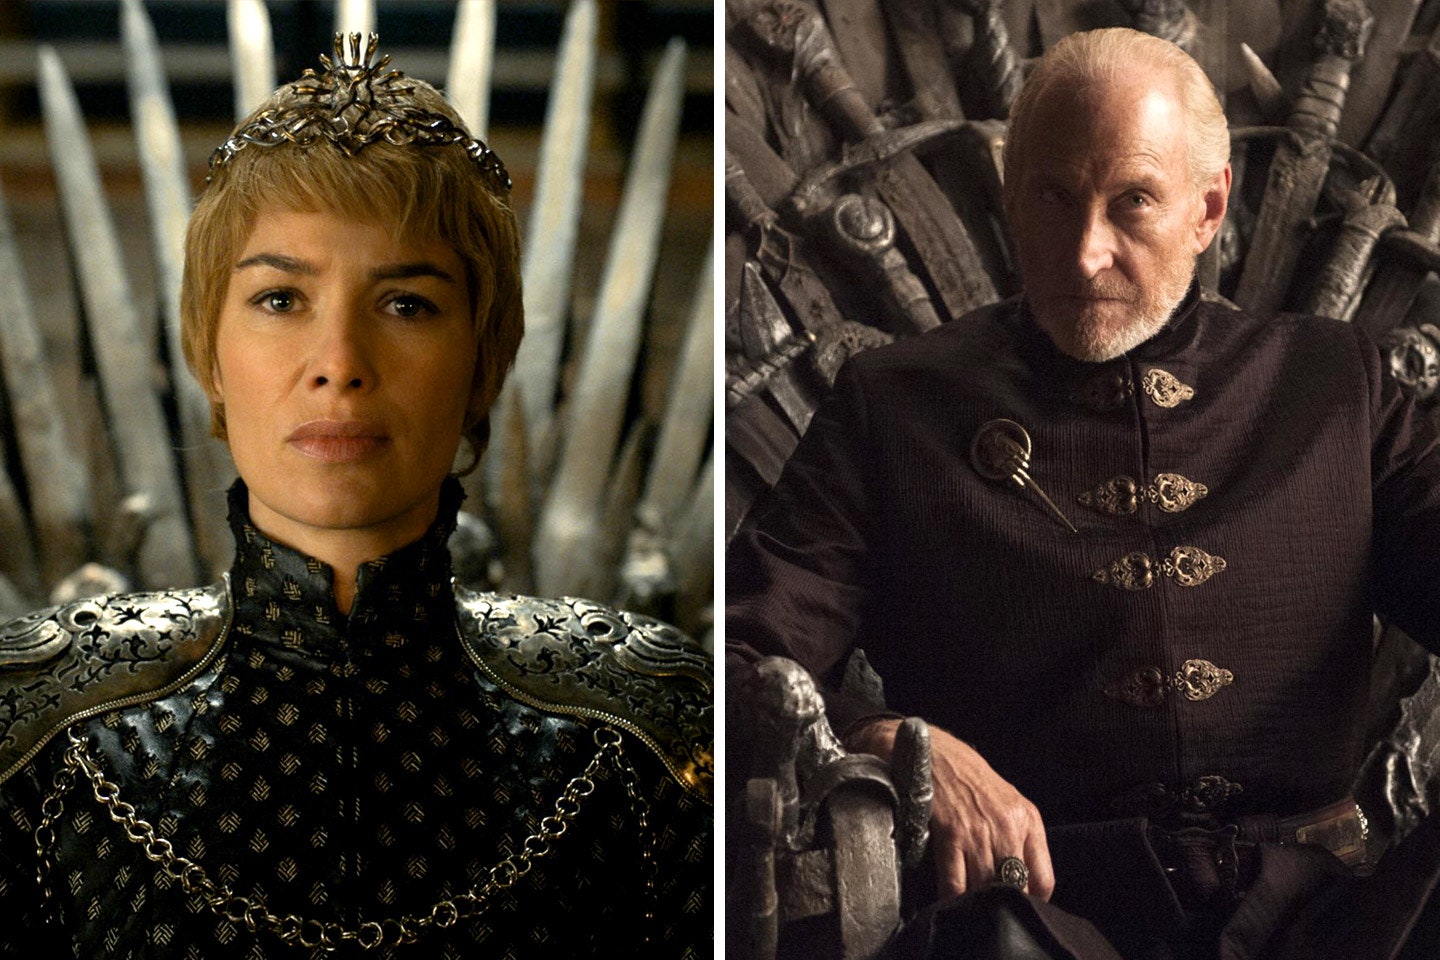 Comparison of Cersei and her father Tywin on the throne.